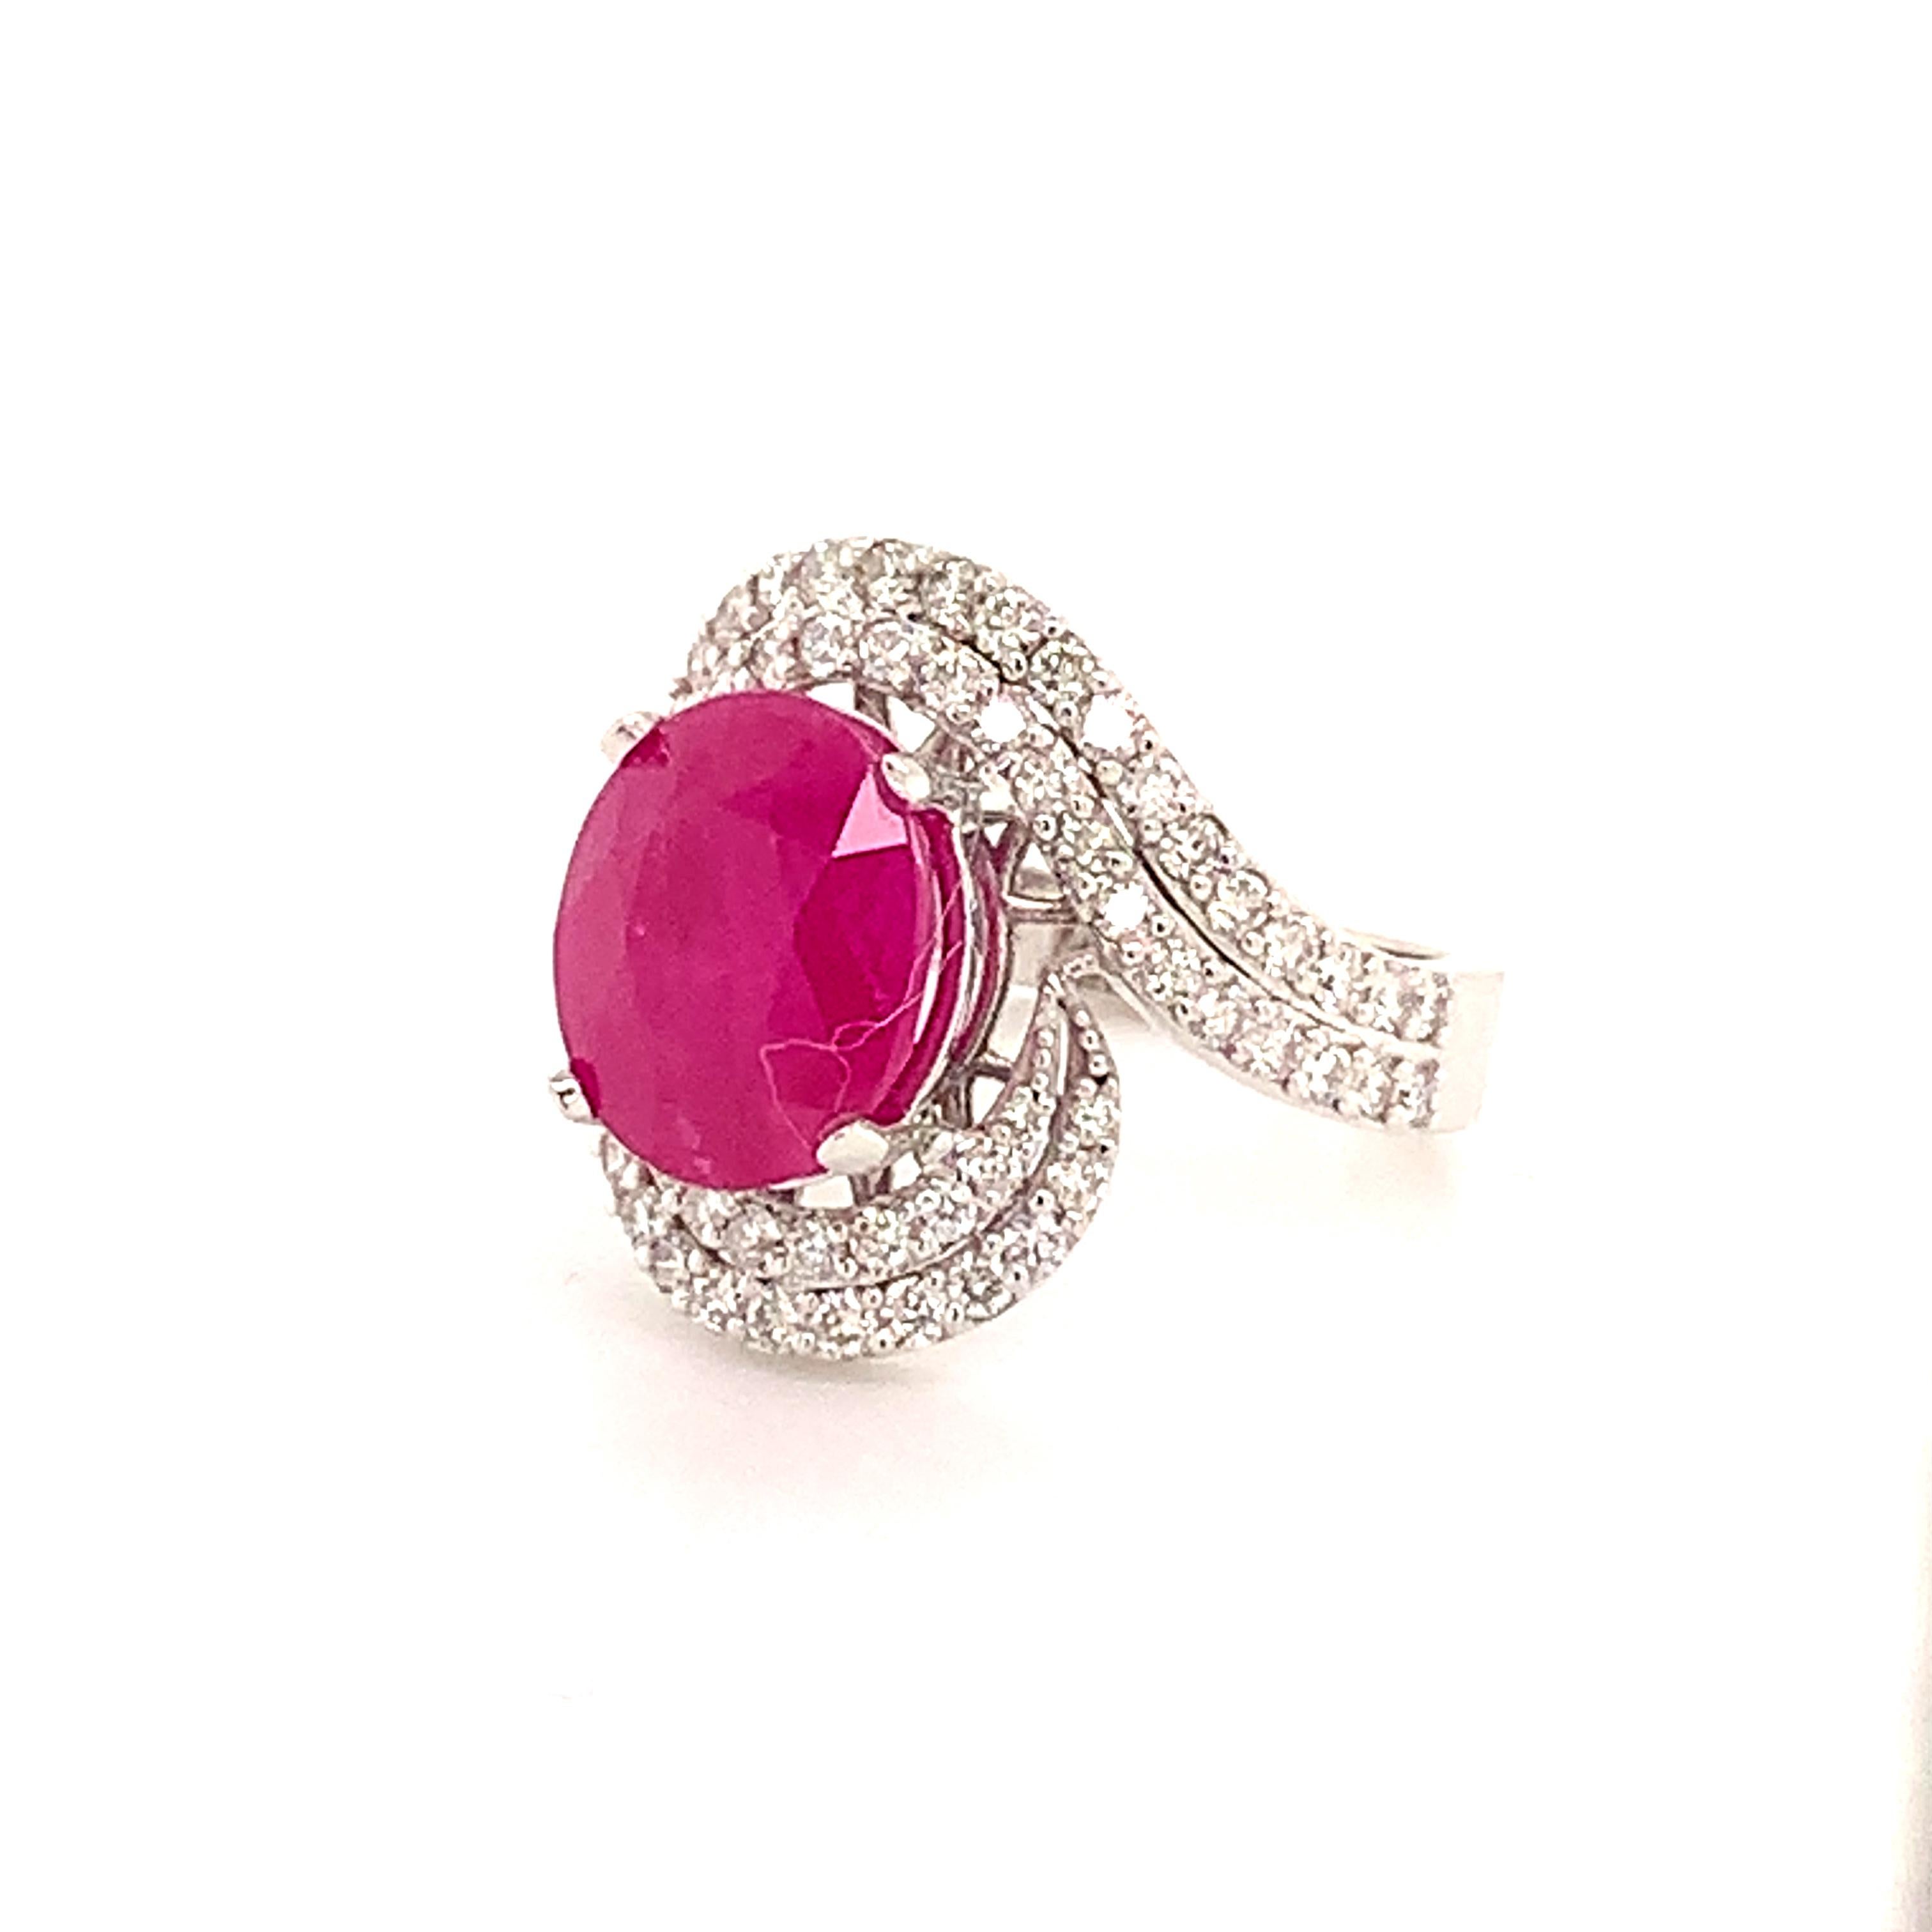 Natural Ruby Diamond Ring 14k Gold 6.32 TCW GIA Certified For Sale 1